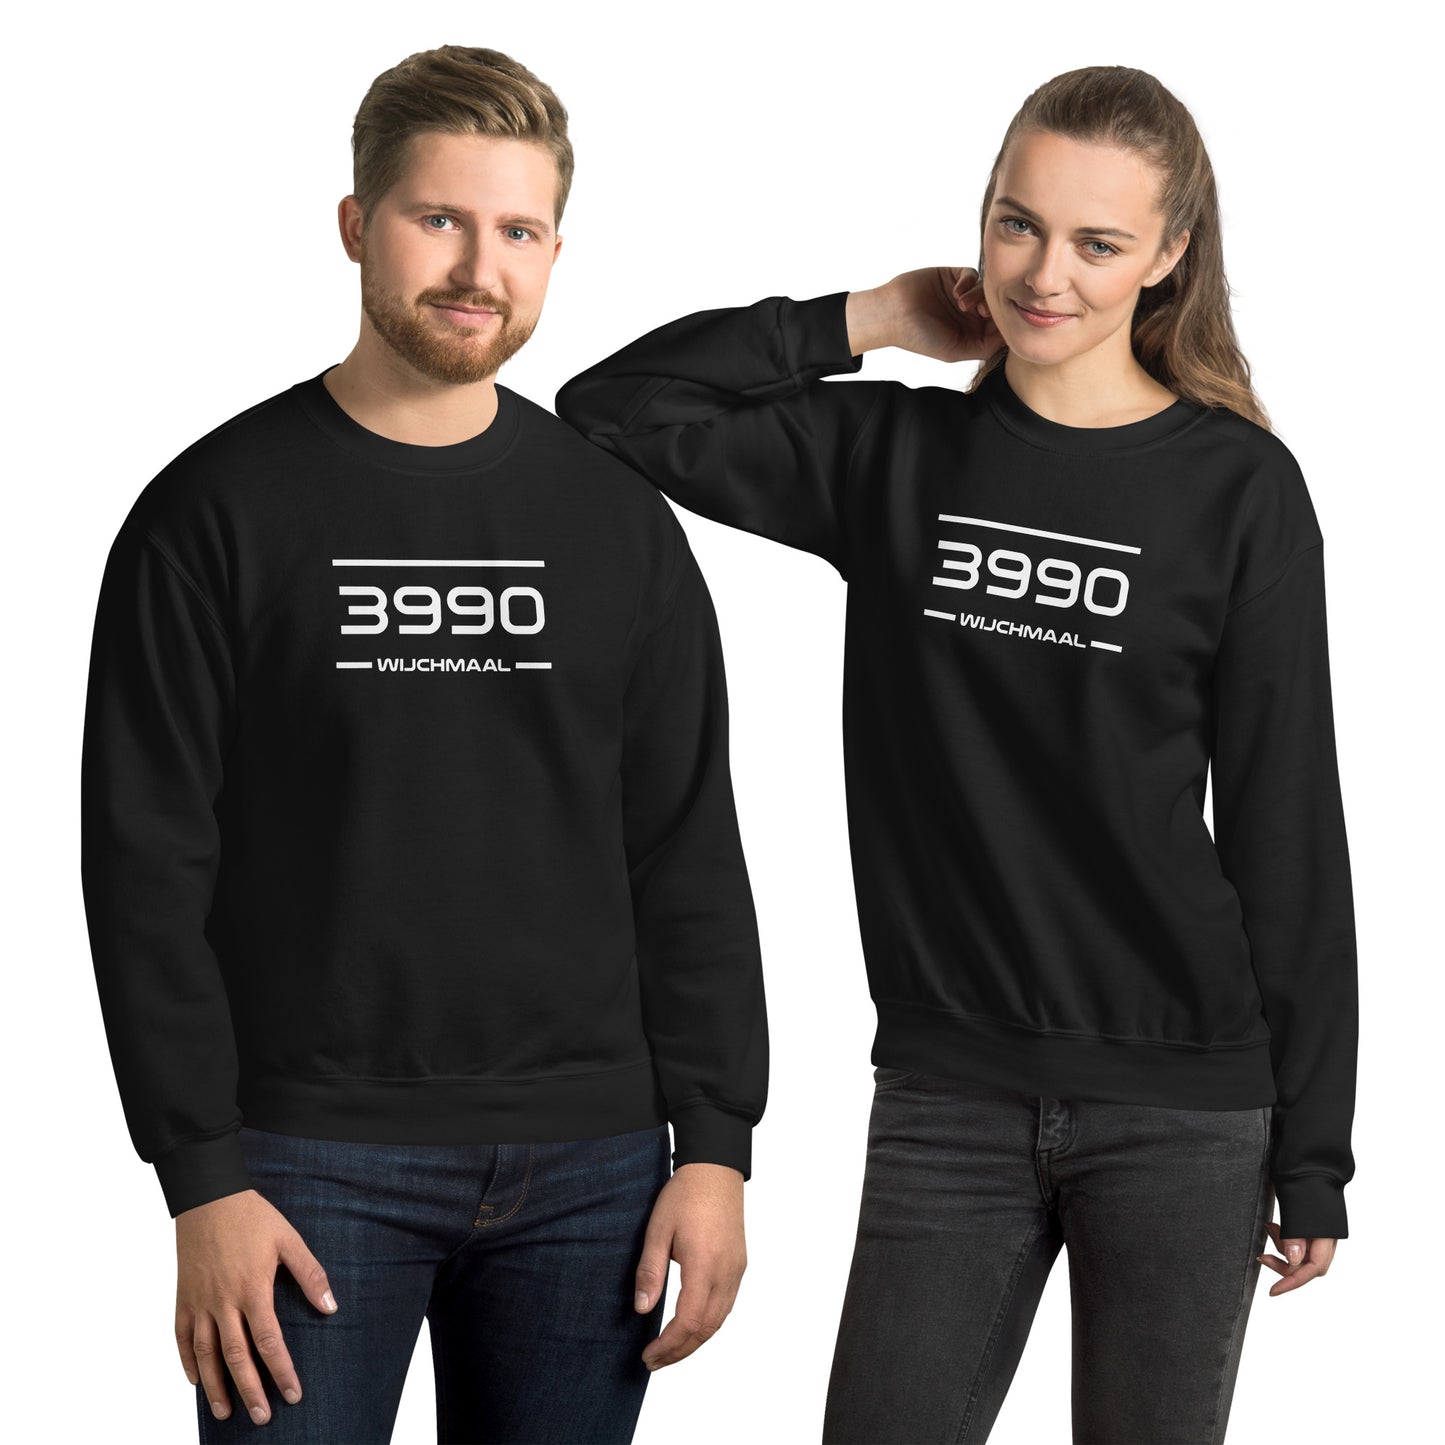 Sweater - 3990 - Wijchmaal (M/V)